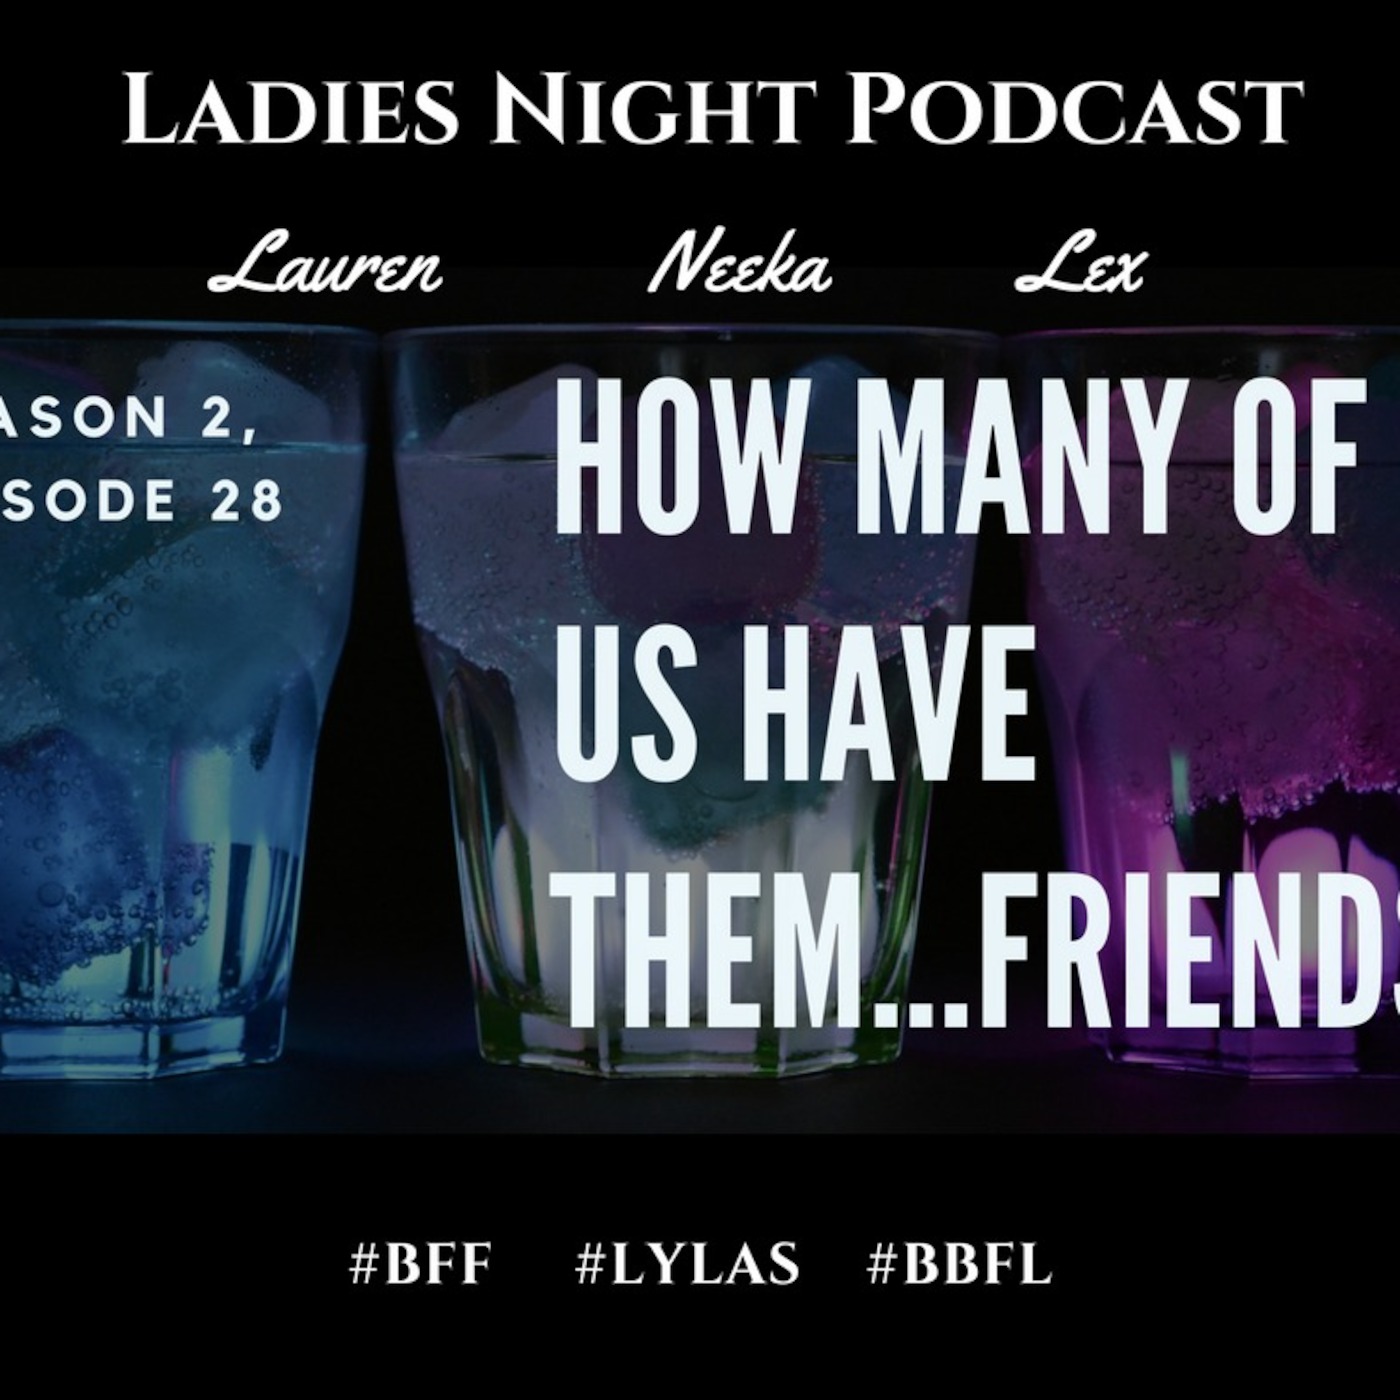 Ladies Night Season 2 Episode 28 - How Many Of Us Have Them...Friends!